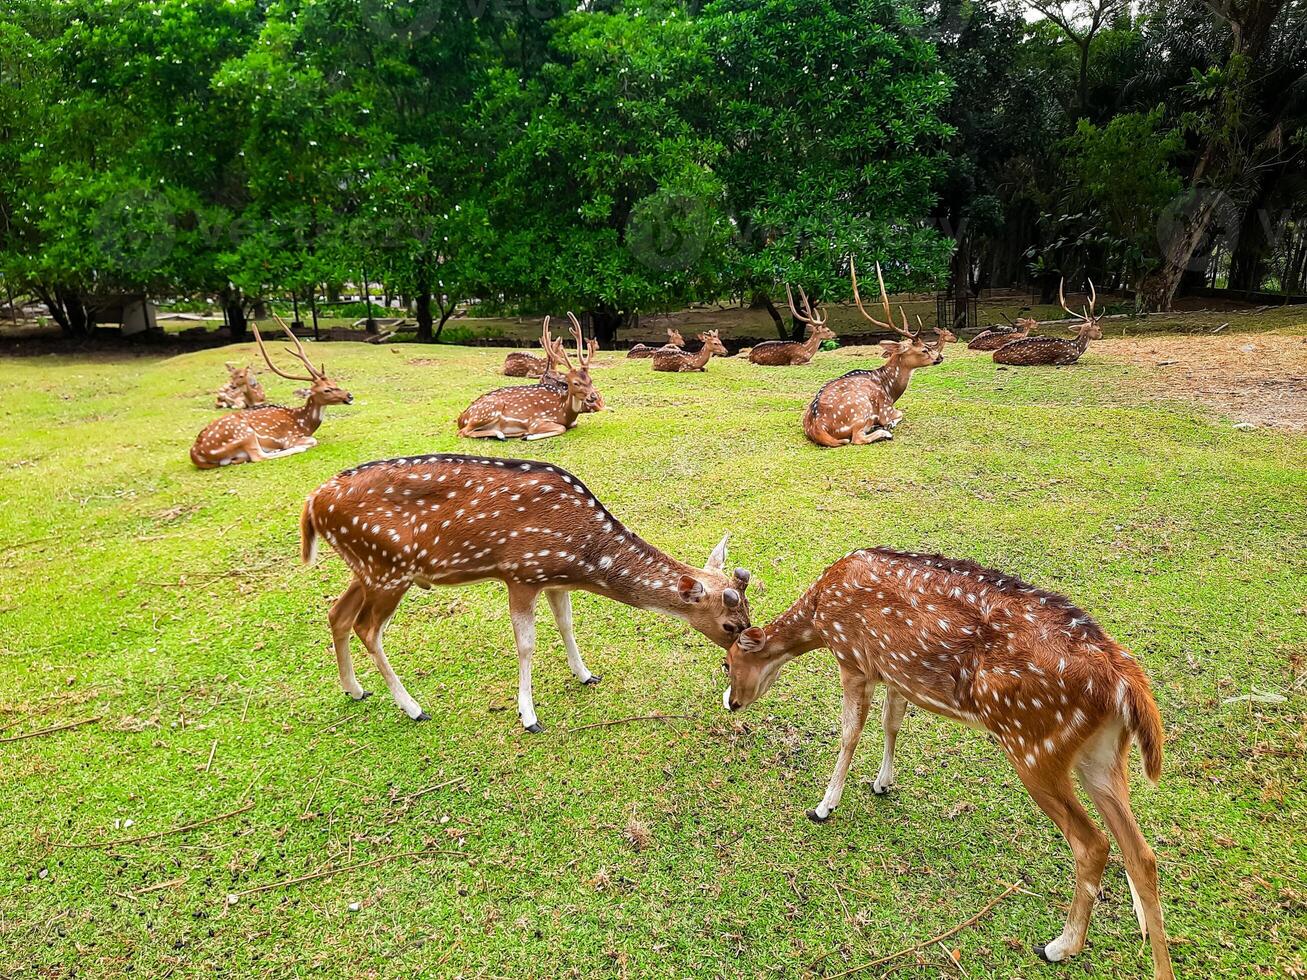 the activities of deer and their herds in a deer conservation area in a yard full of grass photo